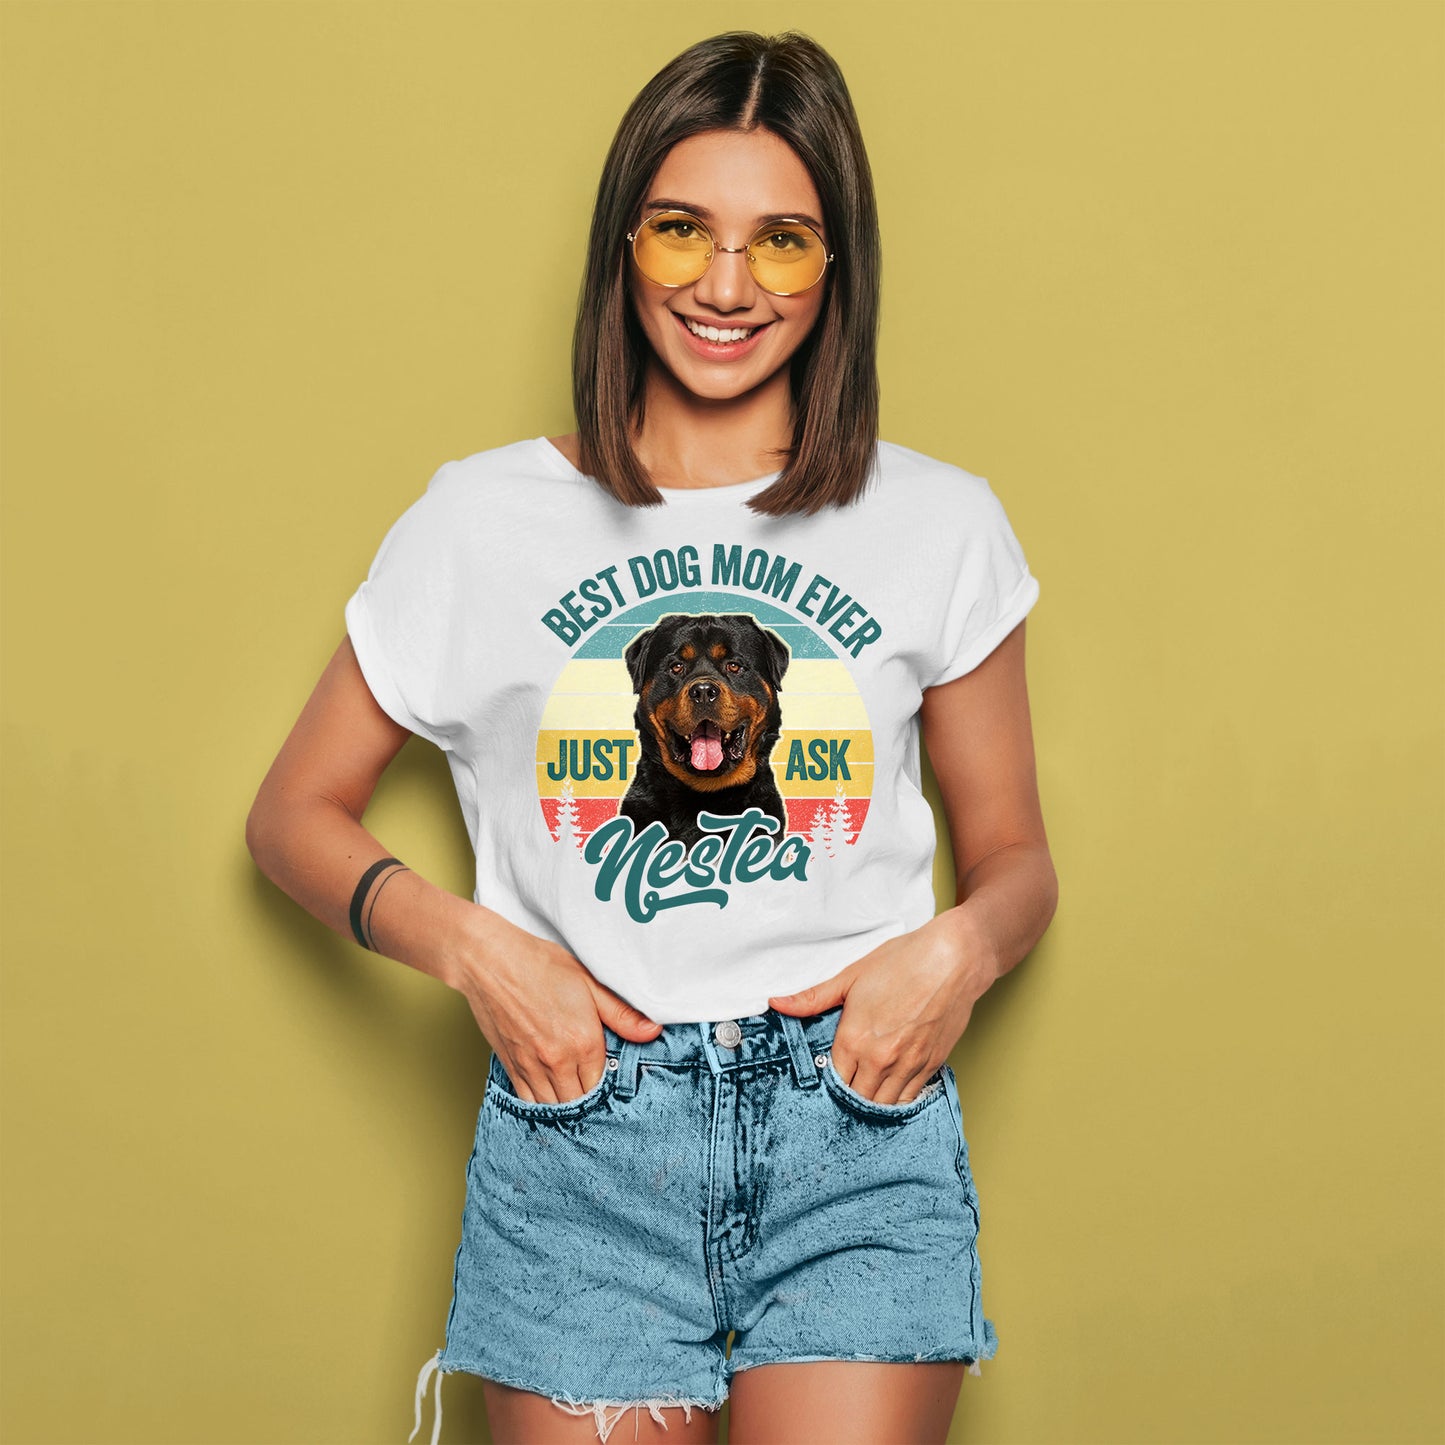 Custom T Shirt With Pet Face | Personalized Gift For Dog & Cat Lovers | Best Mom Ever Unisex T Shirt